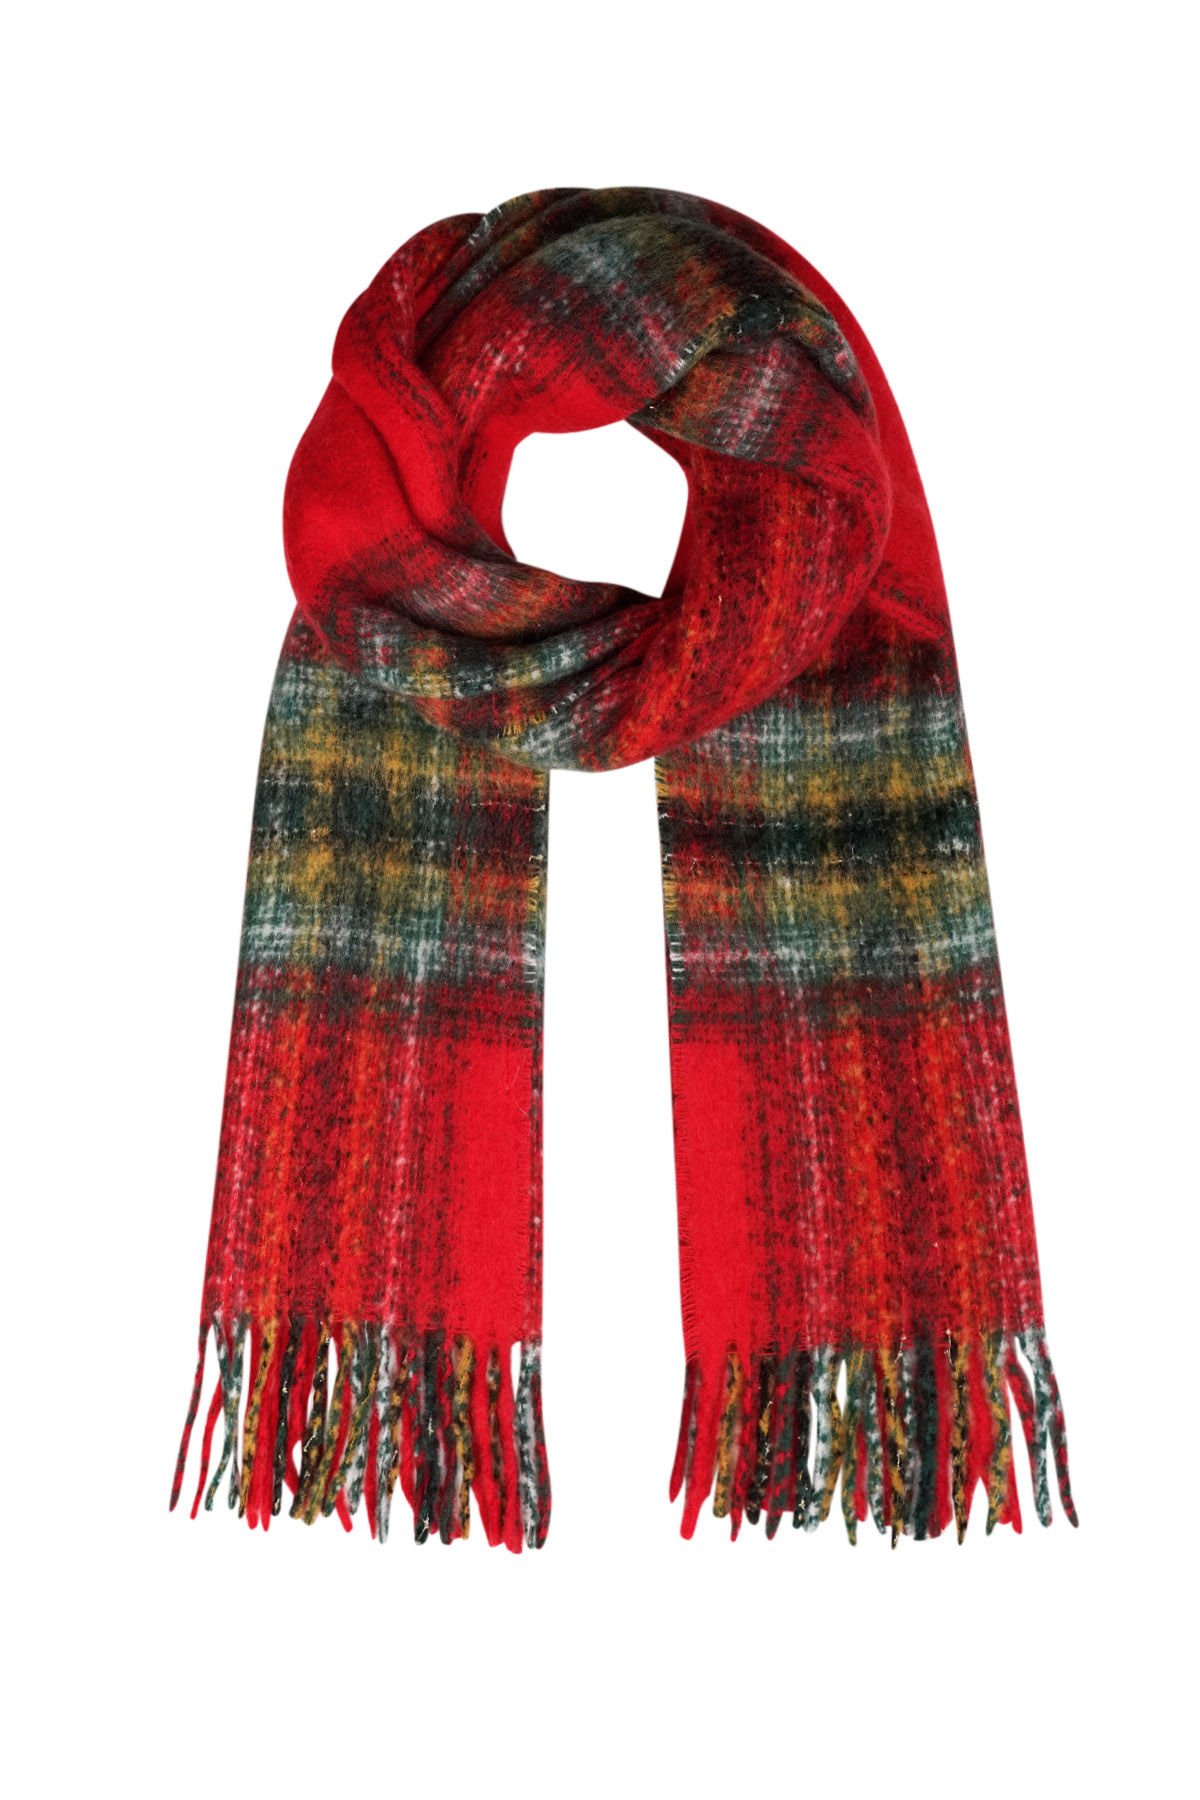 Scarf colorful stripe detail - red